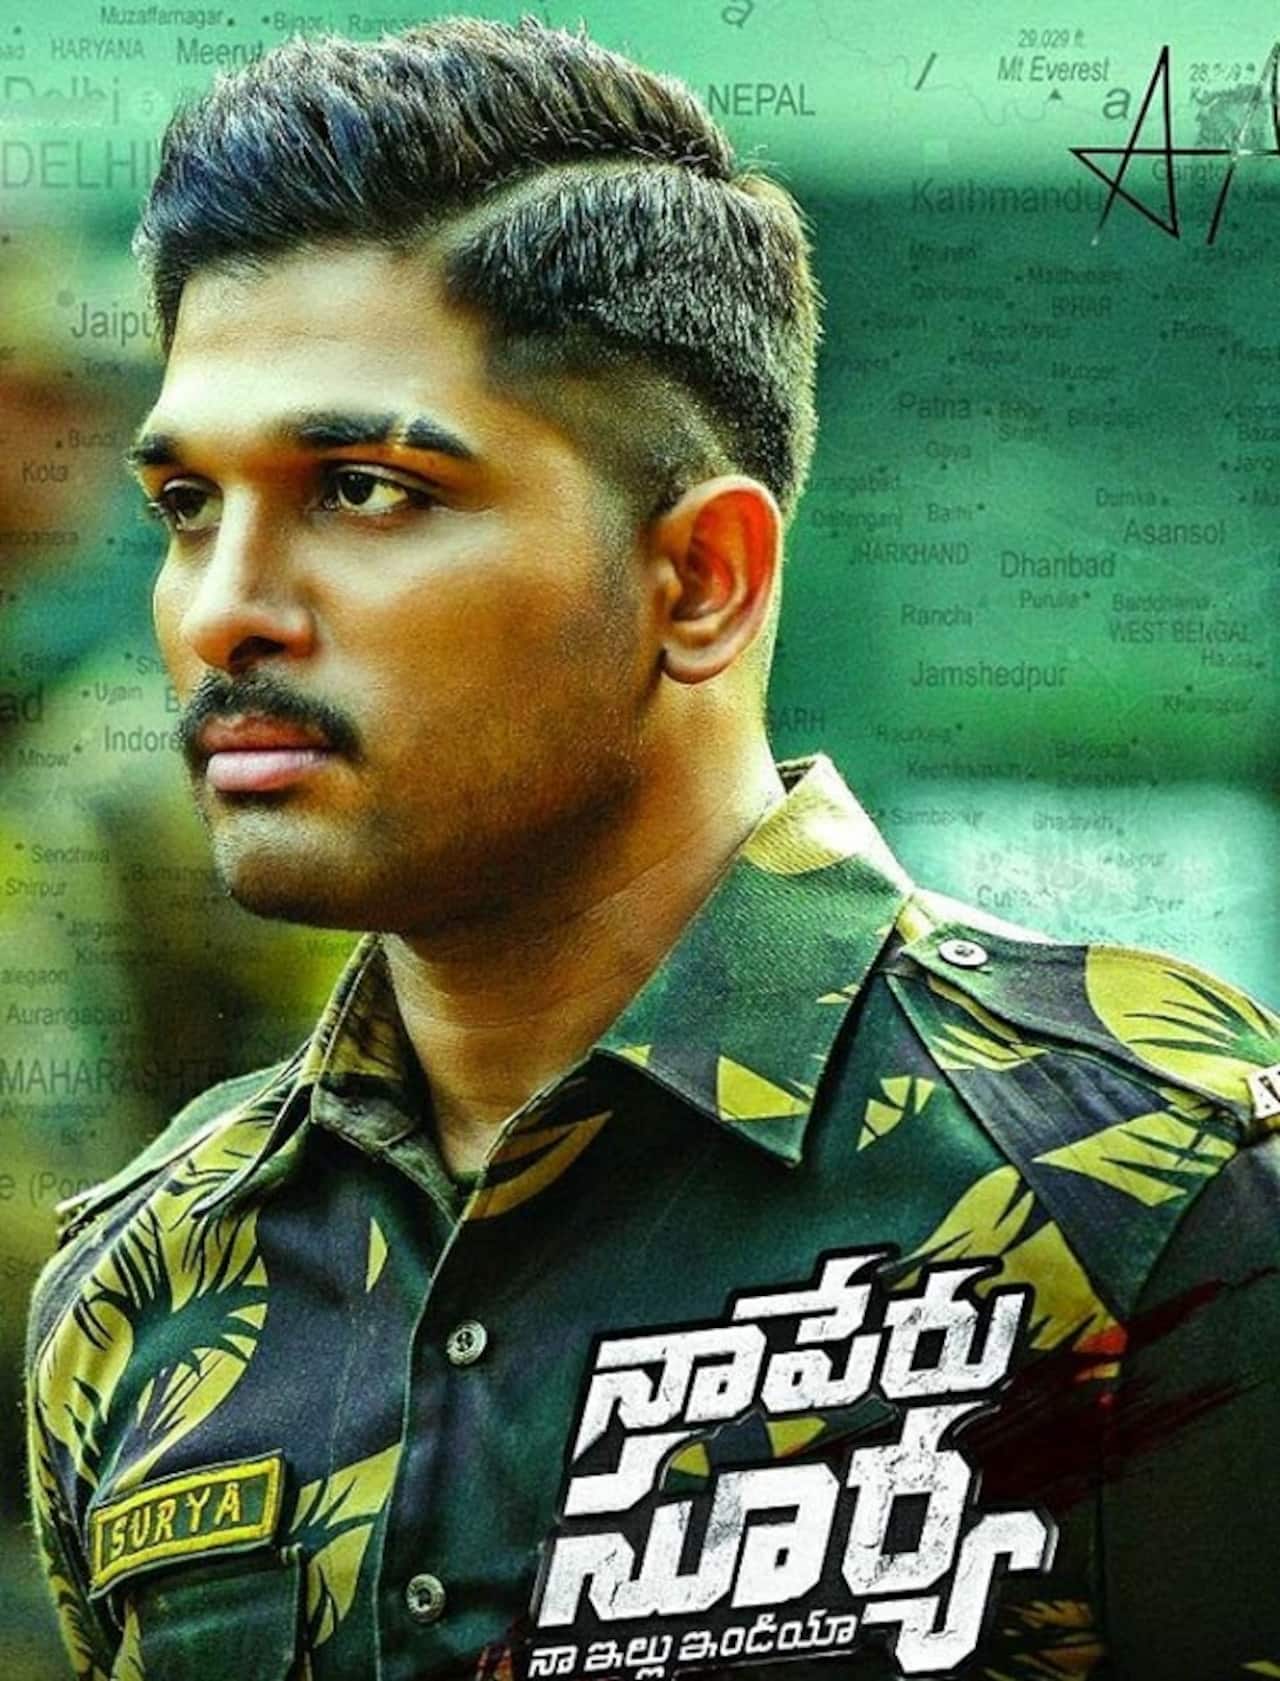 Naa Peru Surya quick movie review: Allu Arjun showcases his class act in  the first half - Bollywood News & Gossip, Movie Reviews, Trailers & Videos  at 